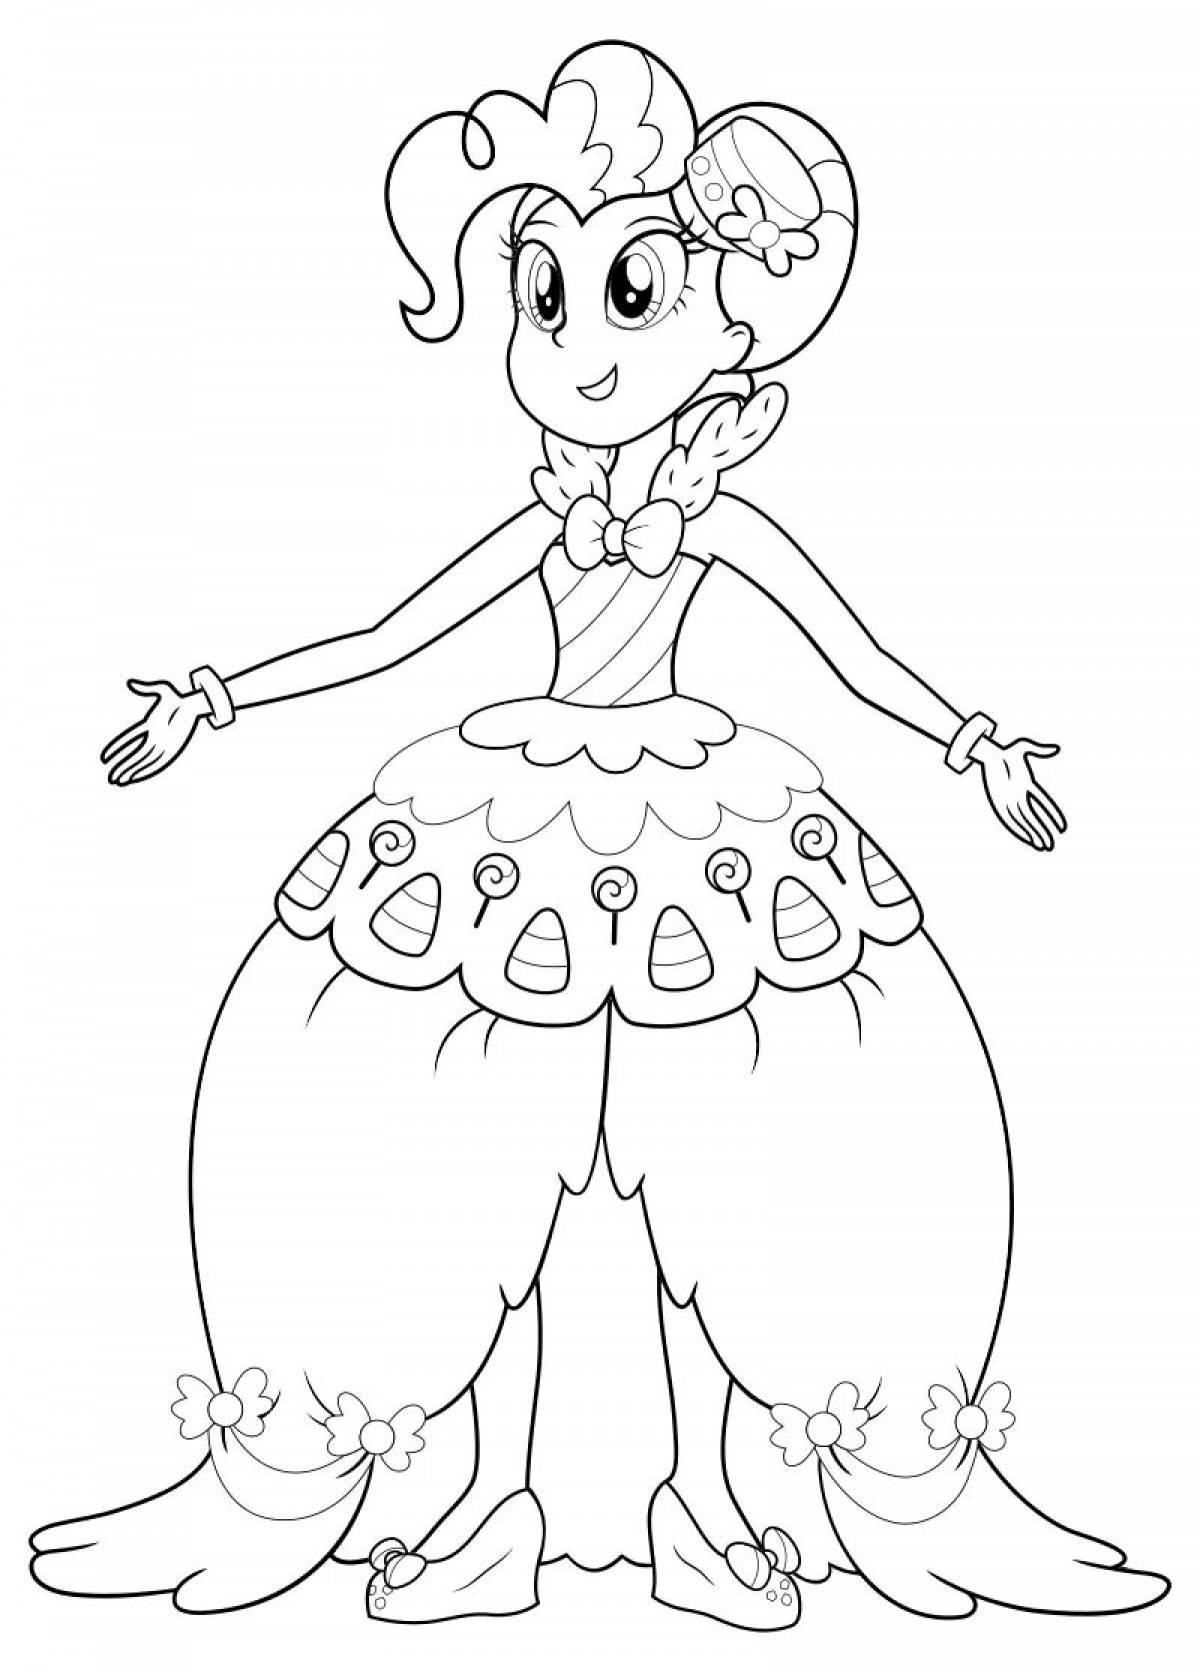 Pinkie Pie beautiful equestria girls coloring page